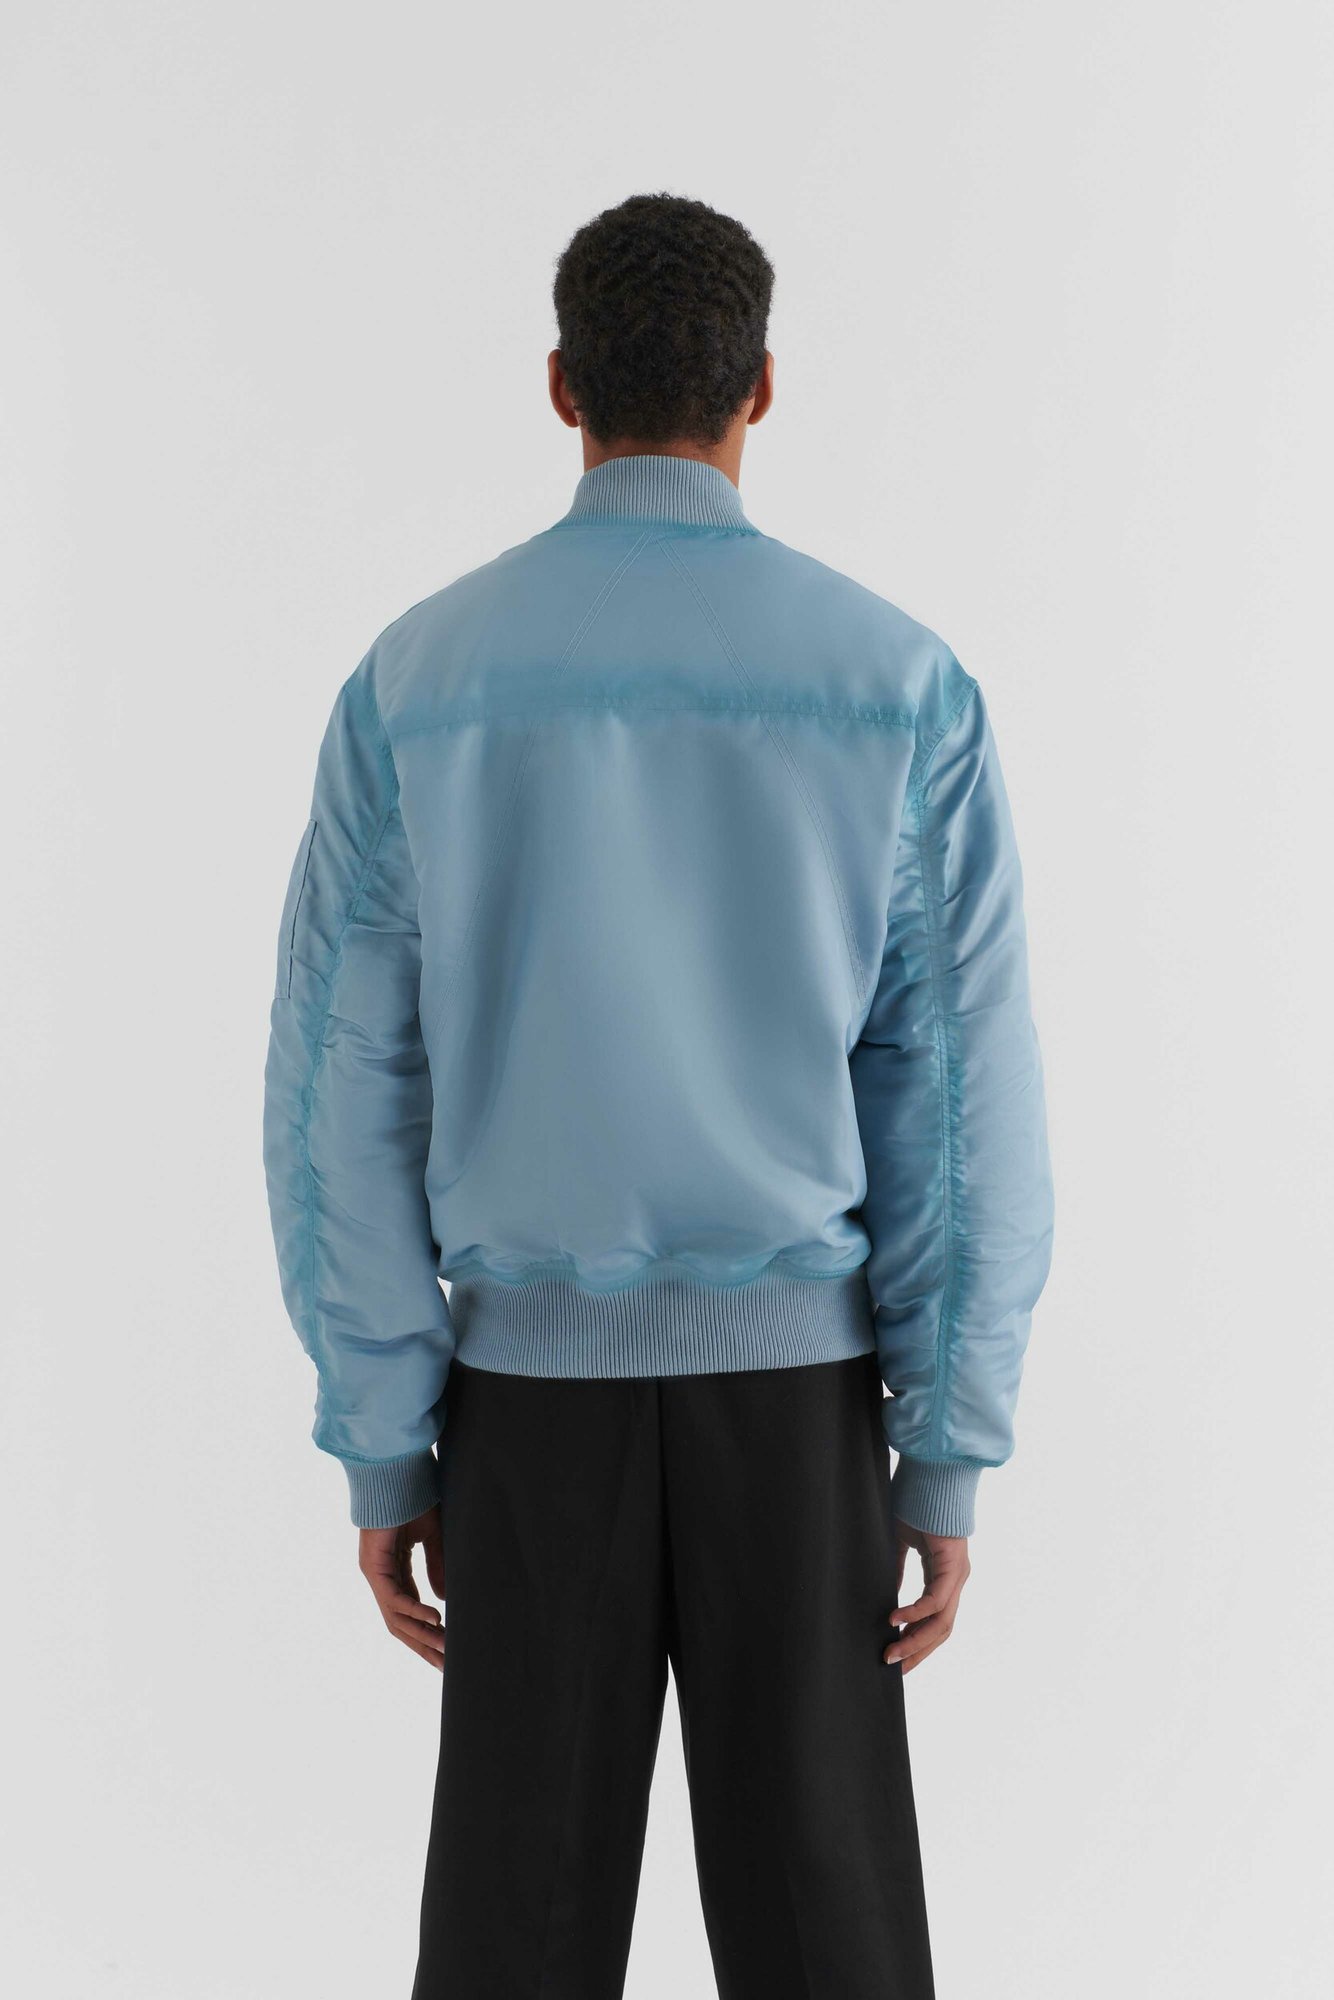 AXEL ARIGATO Annex Bomber Jacket in Bleached Blue S